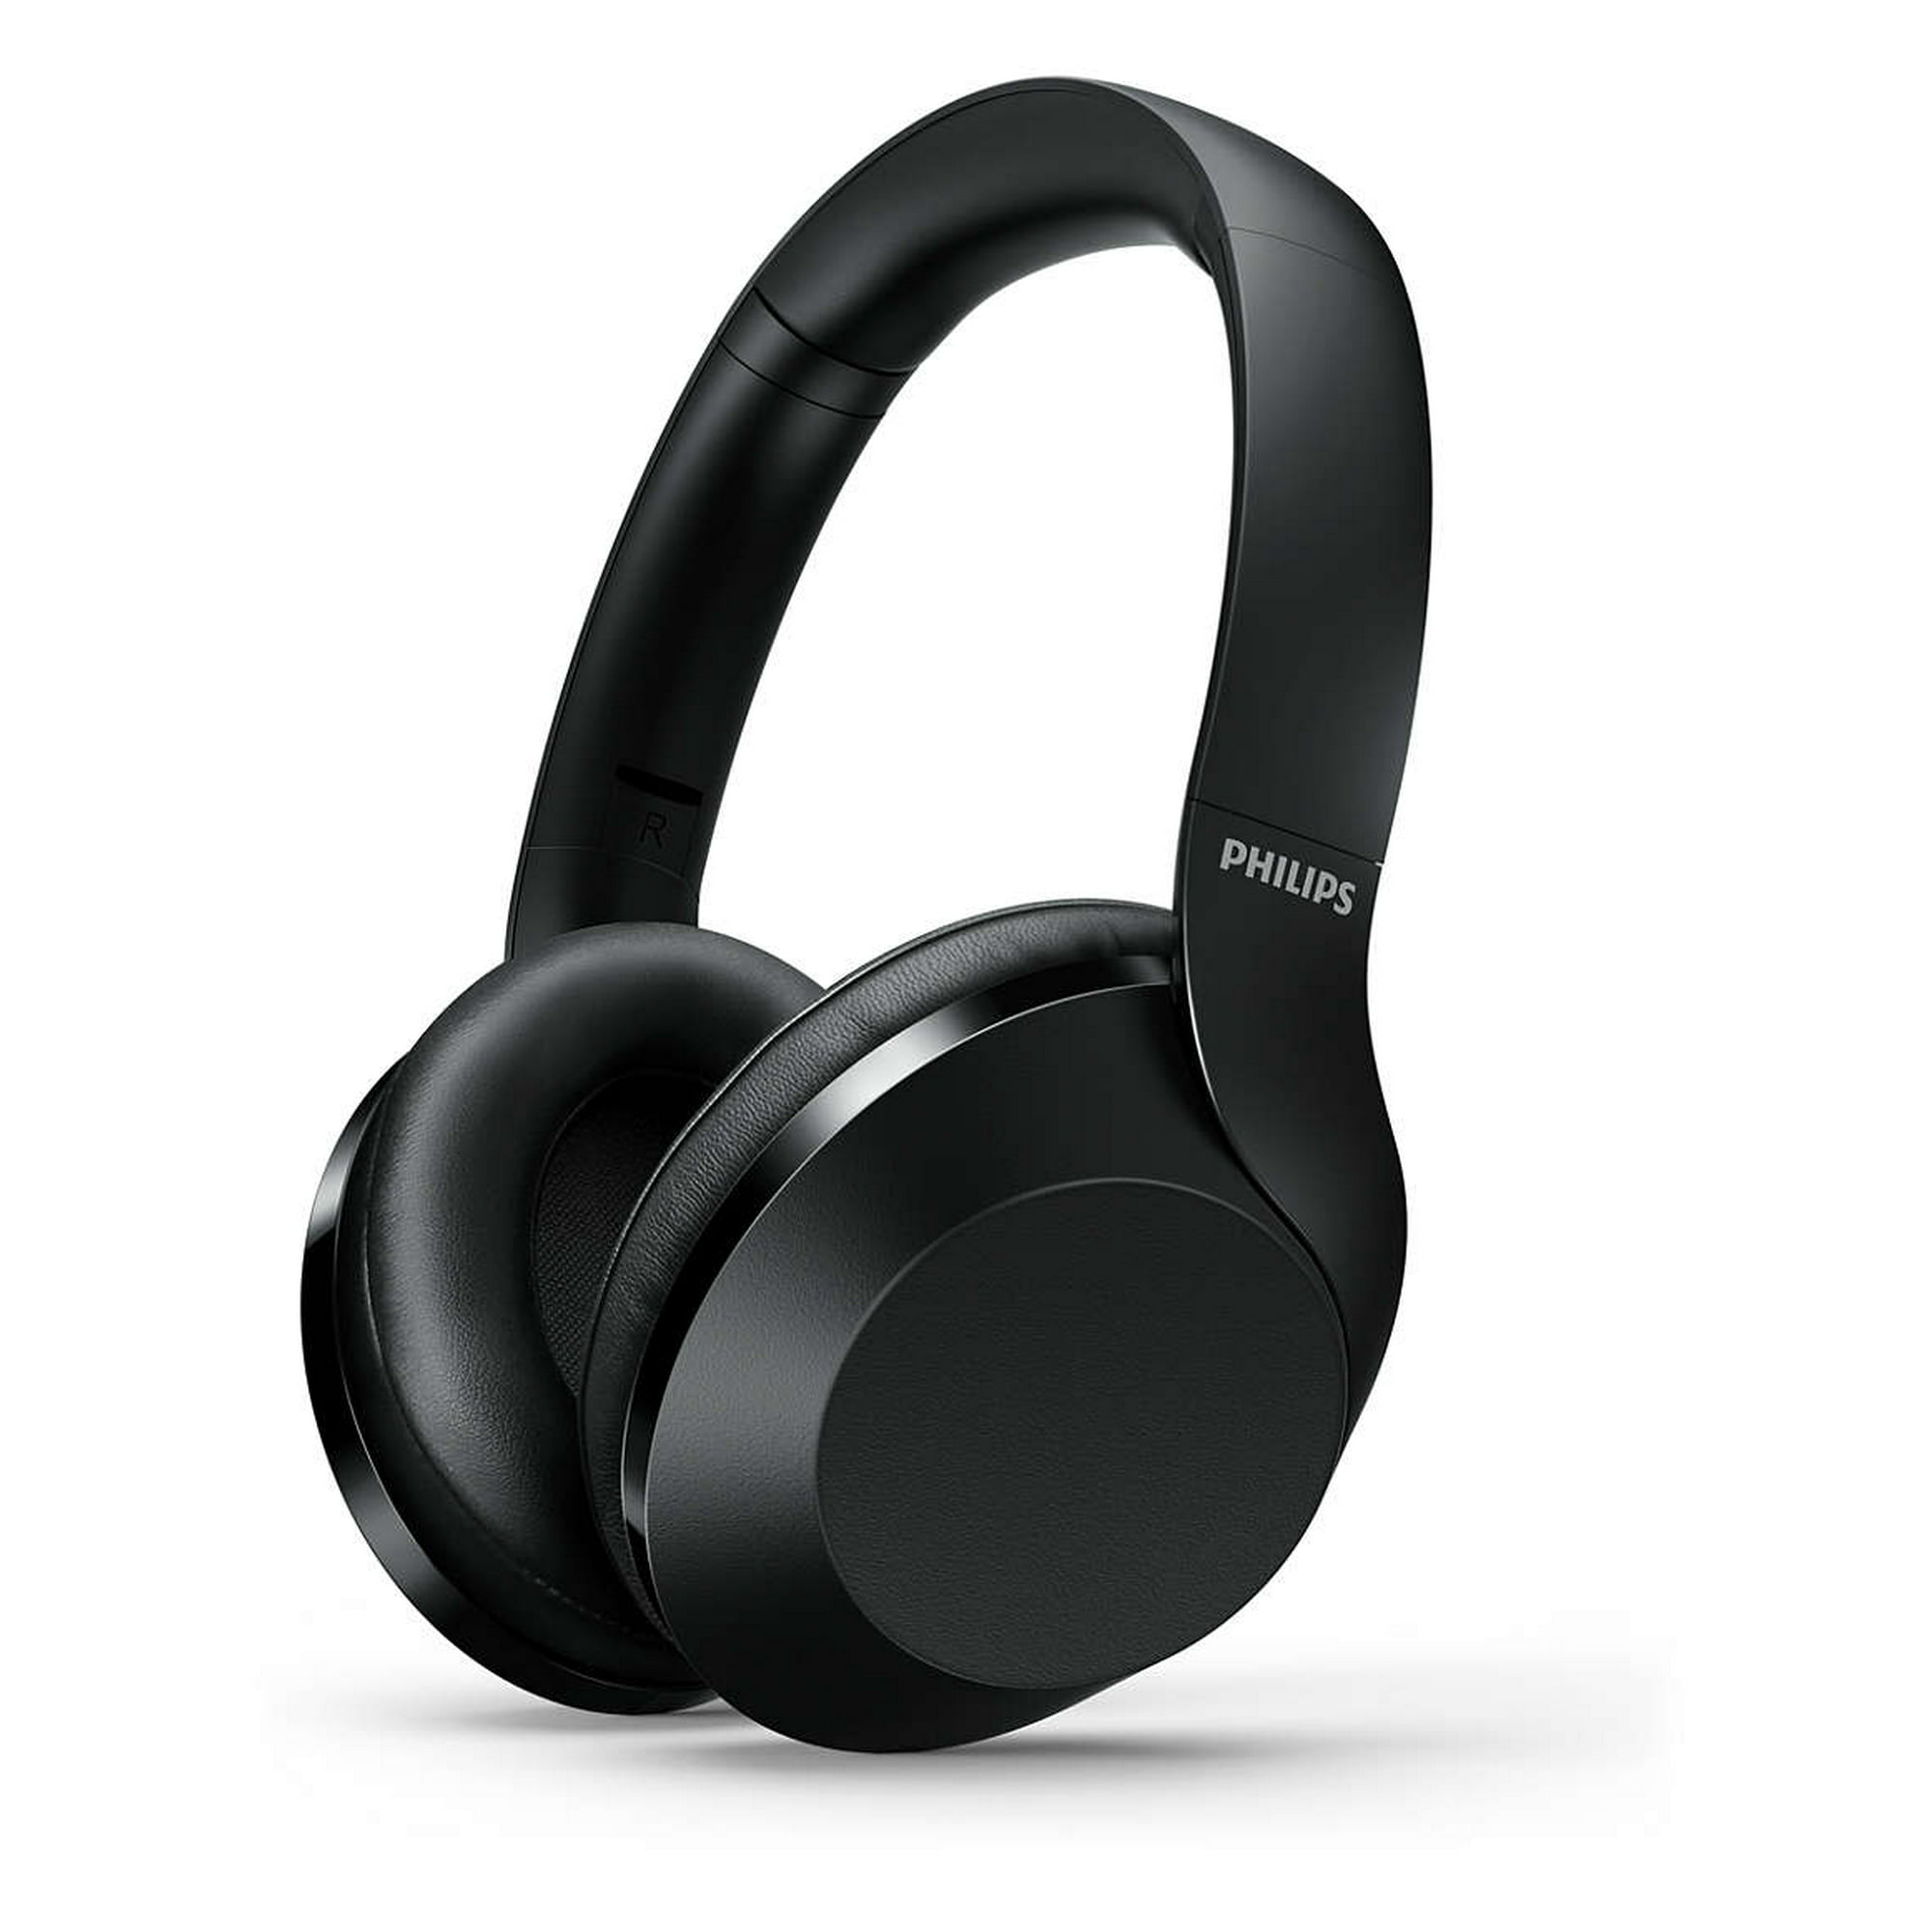 Philips PH802 Over-Ear Wireless Bluetooth Headphones with Cancellation and up to hours of playtime, Black - Walmart.com